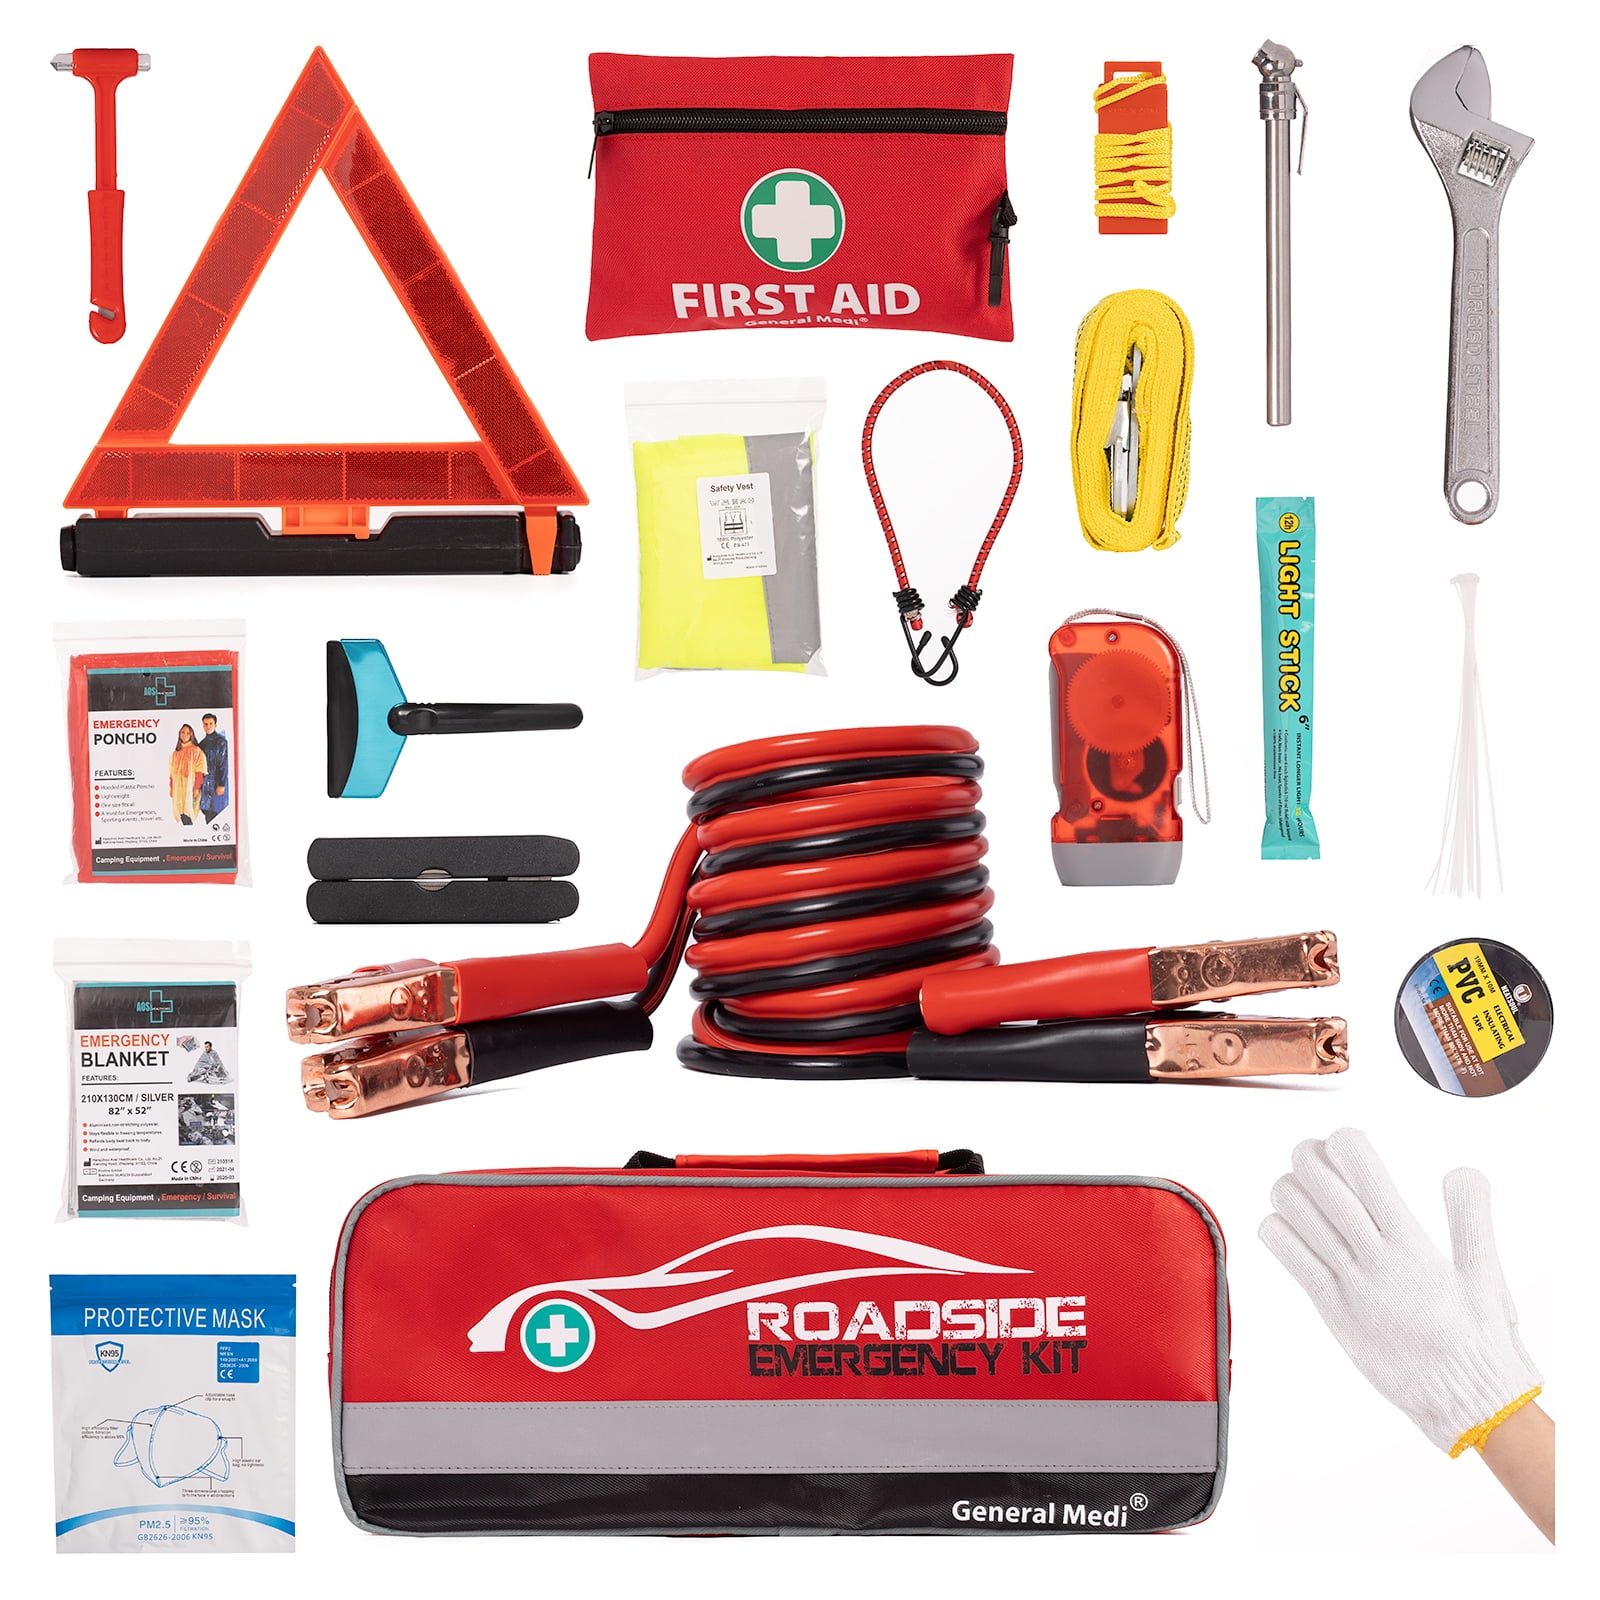 Compact Car Emergency Kit for 1 Person 